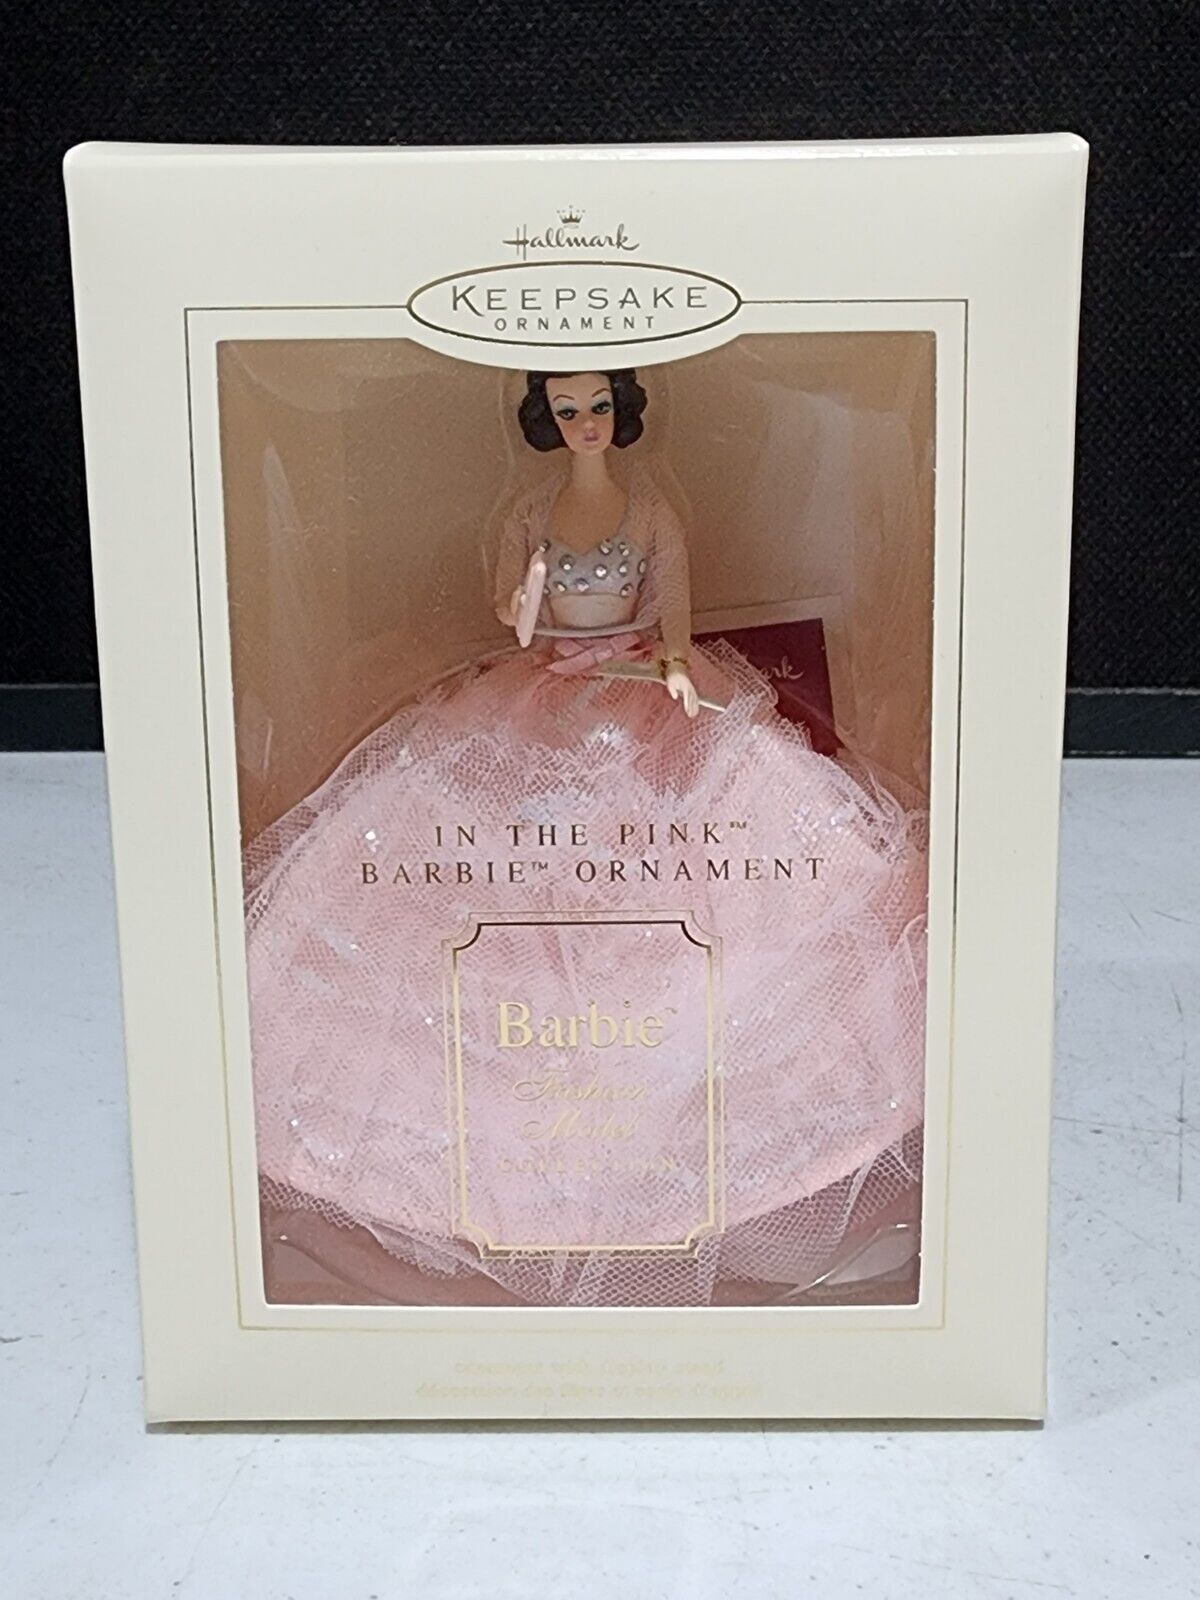 2003 NEW NRFB HALLMARK ORNAMENT BARBIE IN THE PINK FASHION MODEL COLLECTION